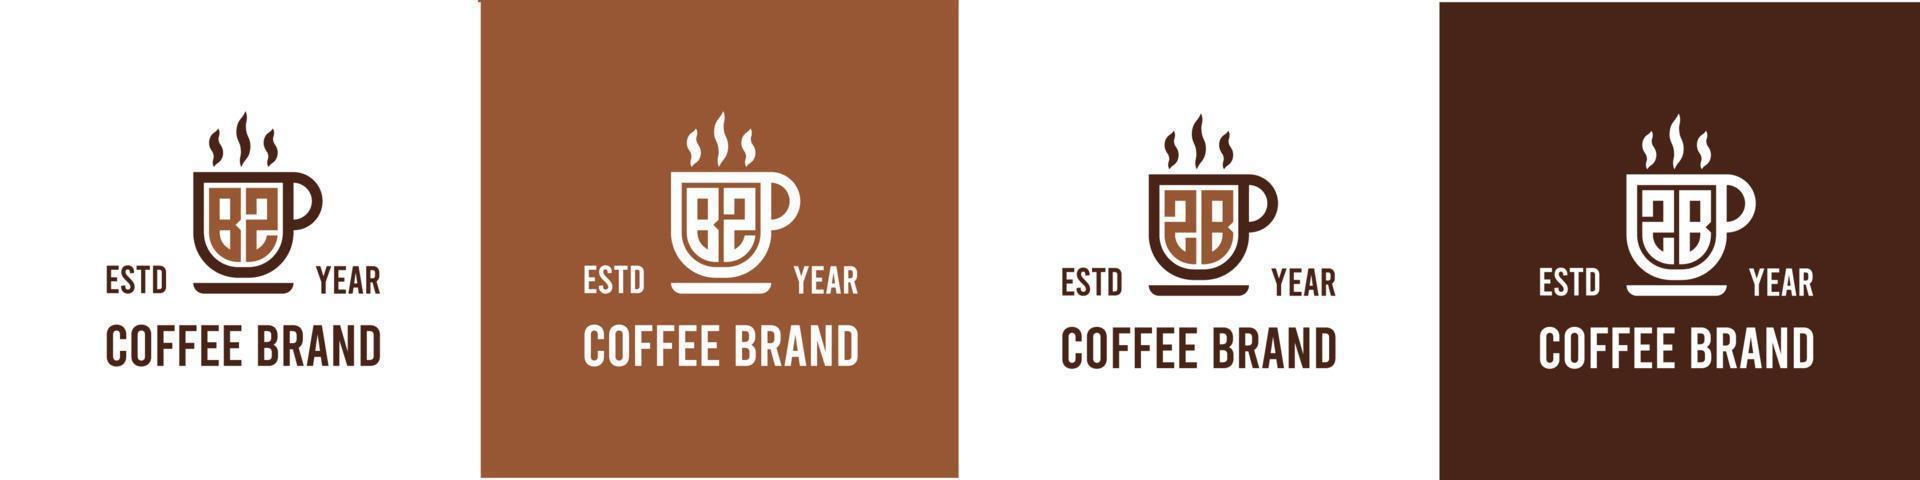 Letter BZ and ZB Coffee Logo, suitable for any business related to Coffee, Tea, or Other with BZ or ZB initials. vector